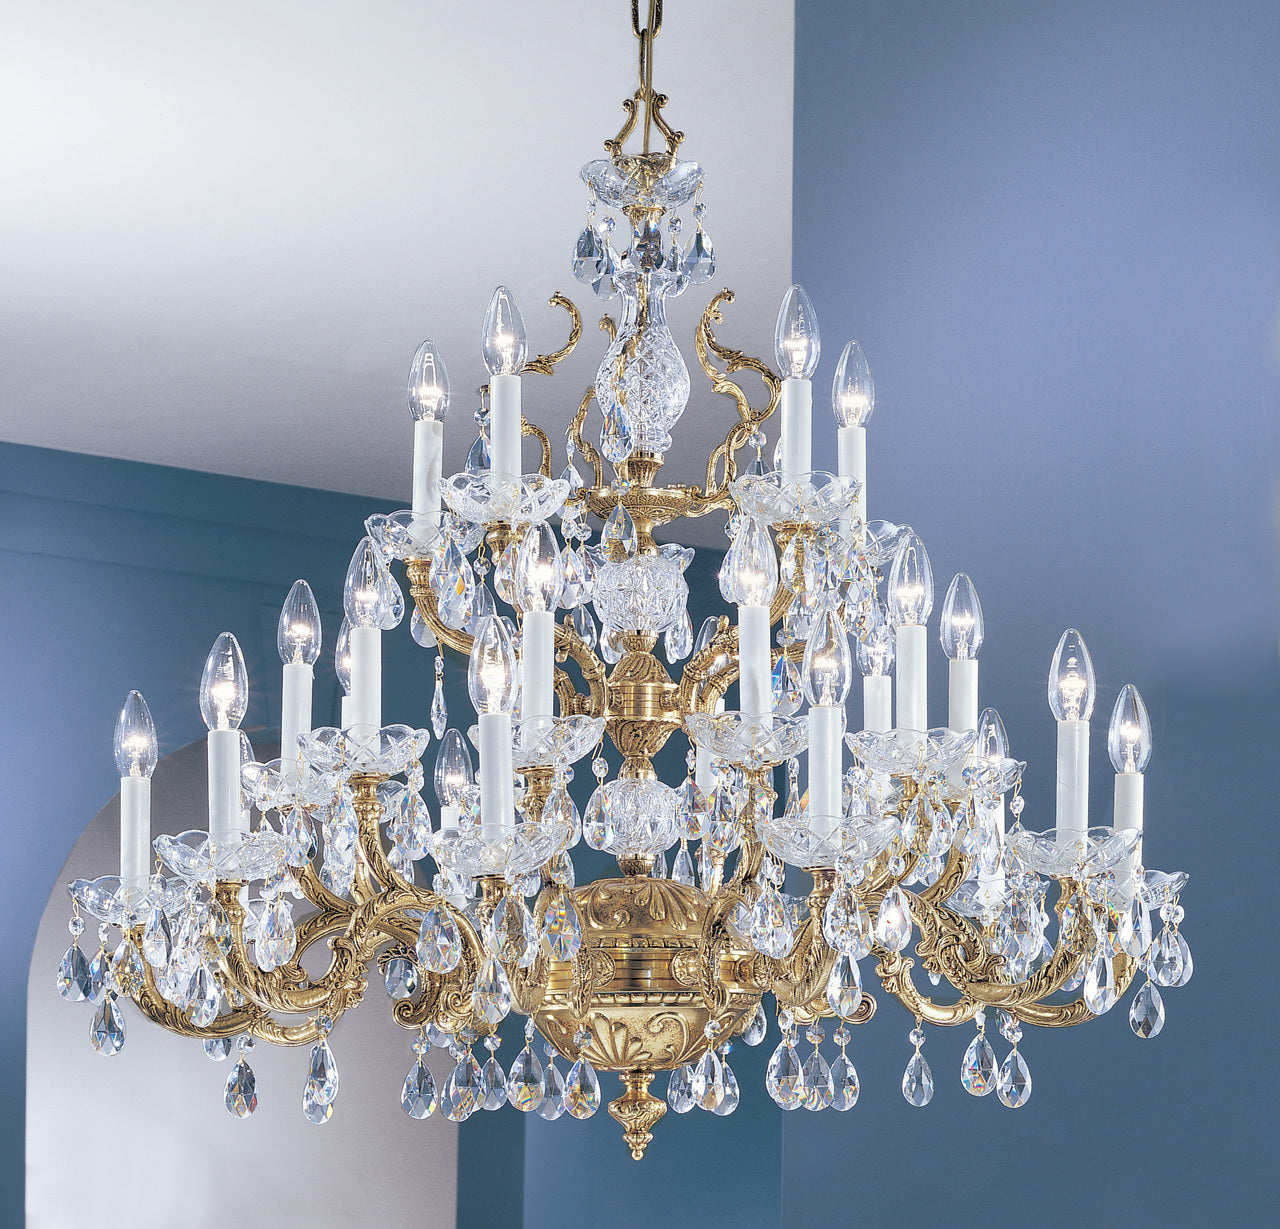 Classic Lighting 5535 RB CGT Madrid Crystal/Cast Brass Chandelier in Roman Bronze (Imported from Spain)